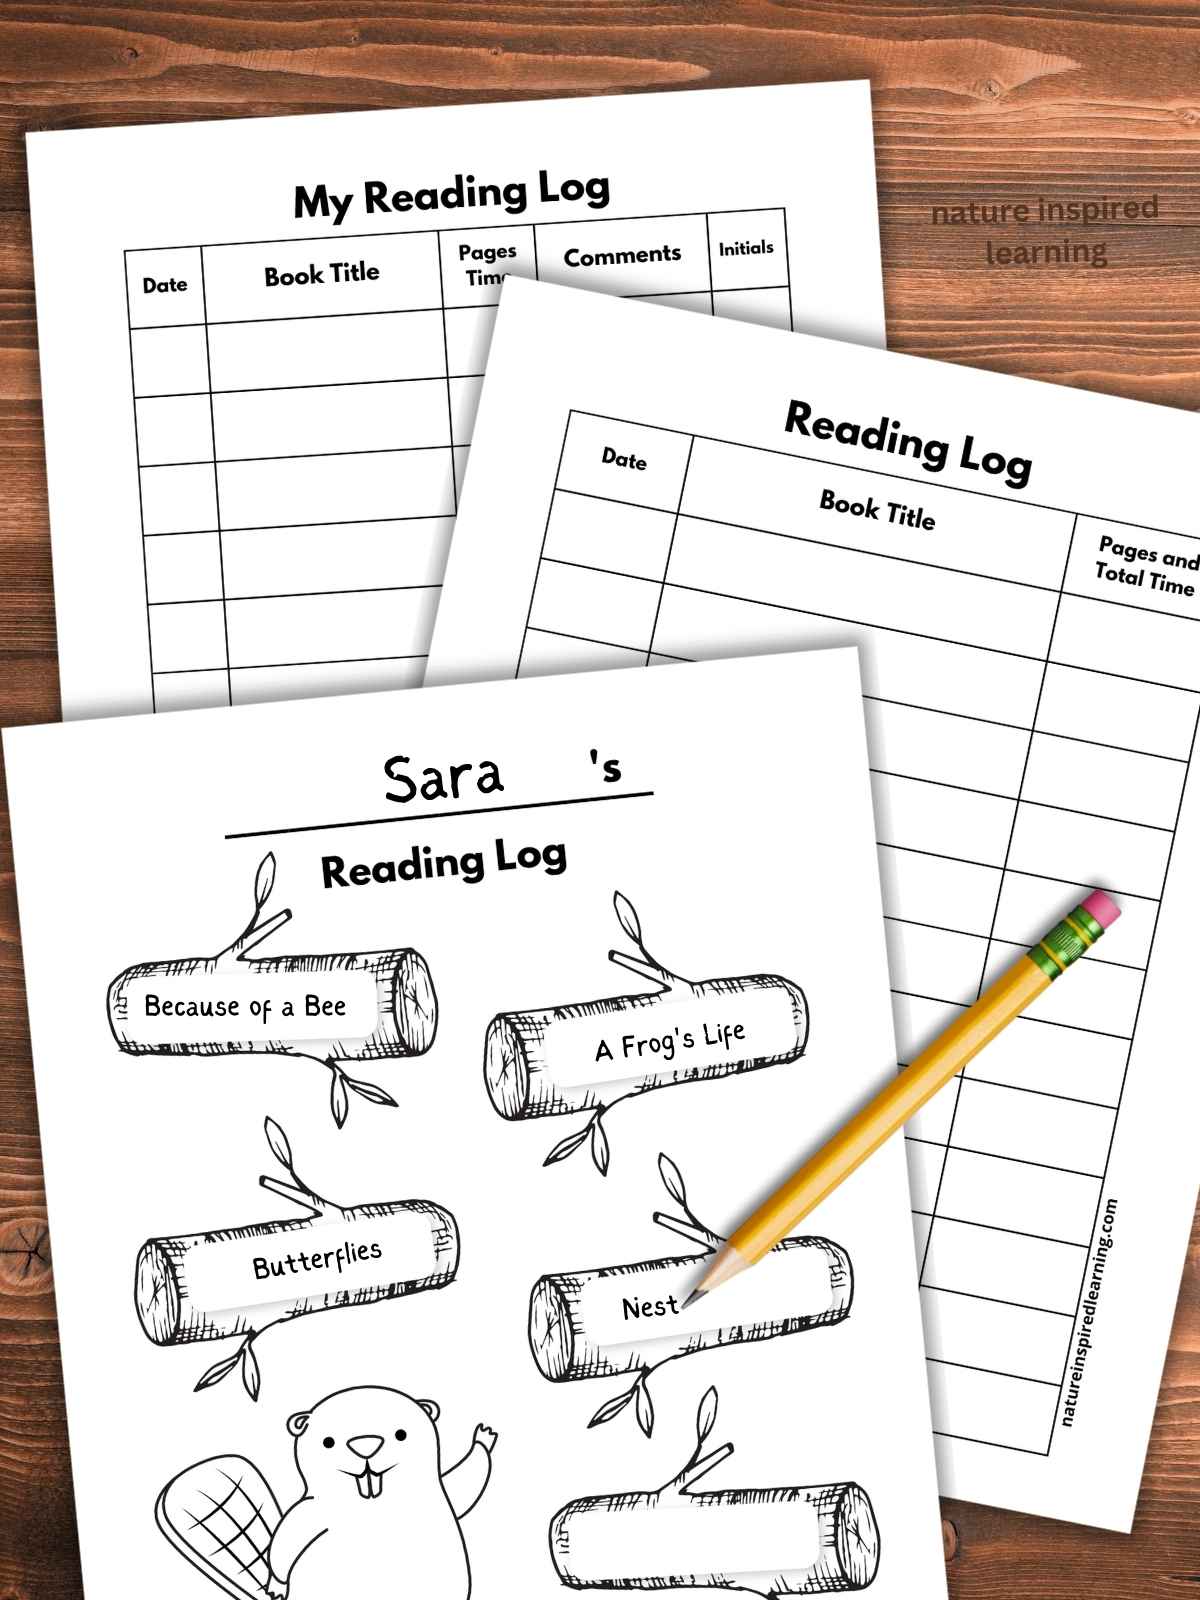 three printable reading logs overlapping on a wooden background with a pencil on top